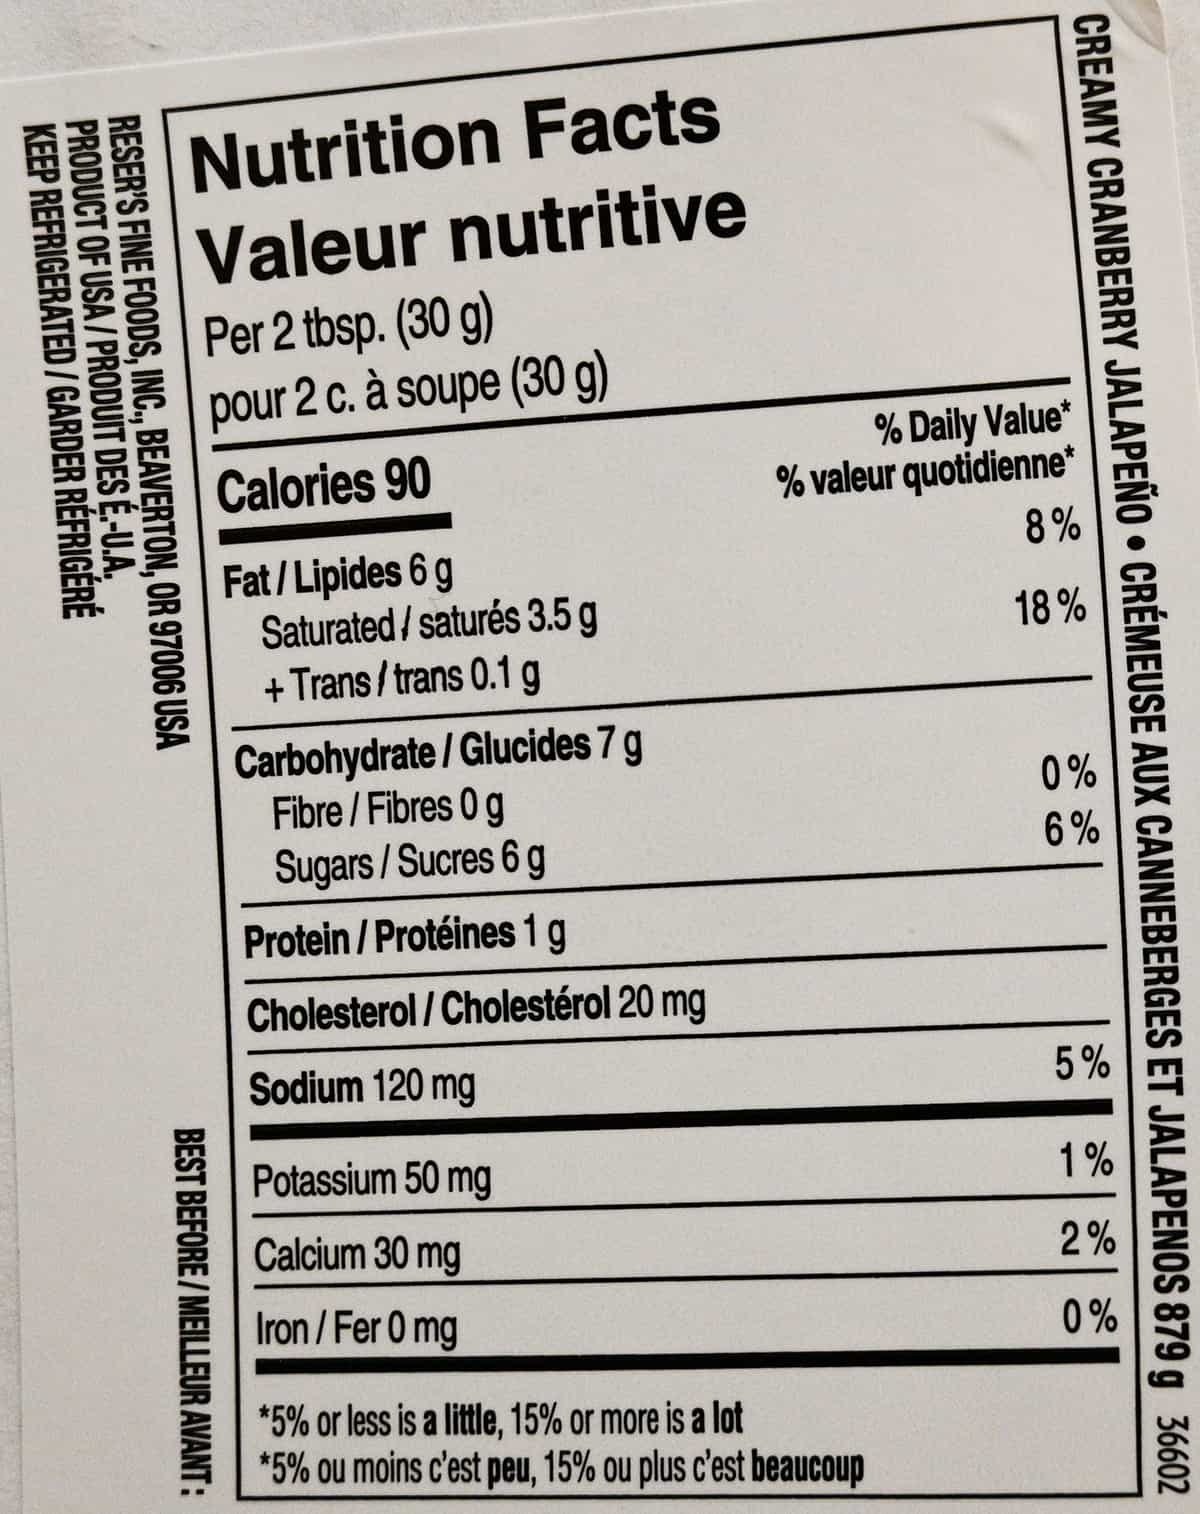 Image of the nutrition facts for the dip from the container.